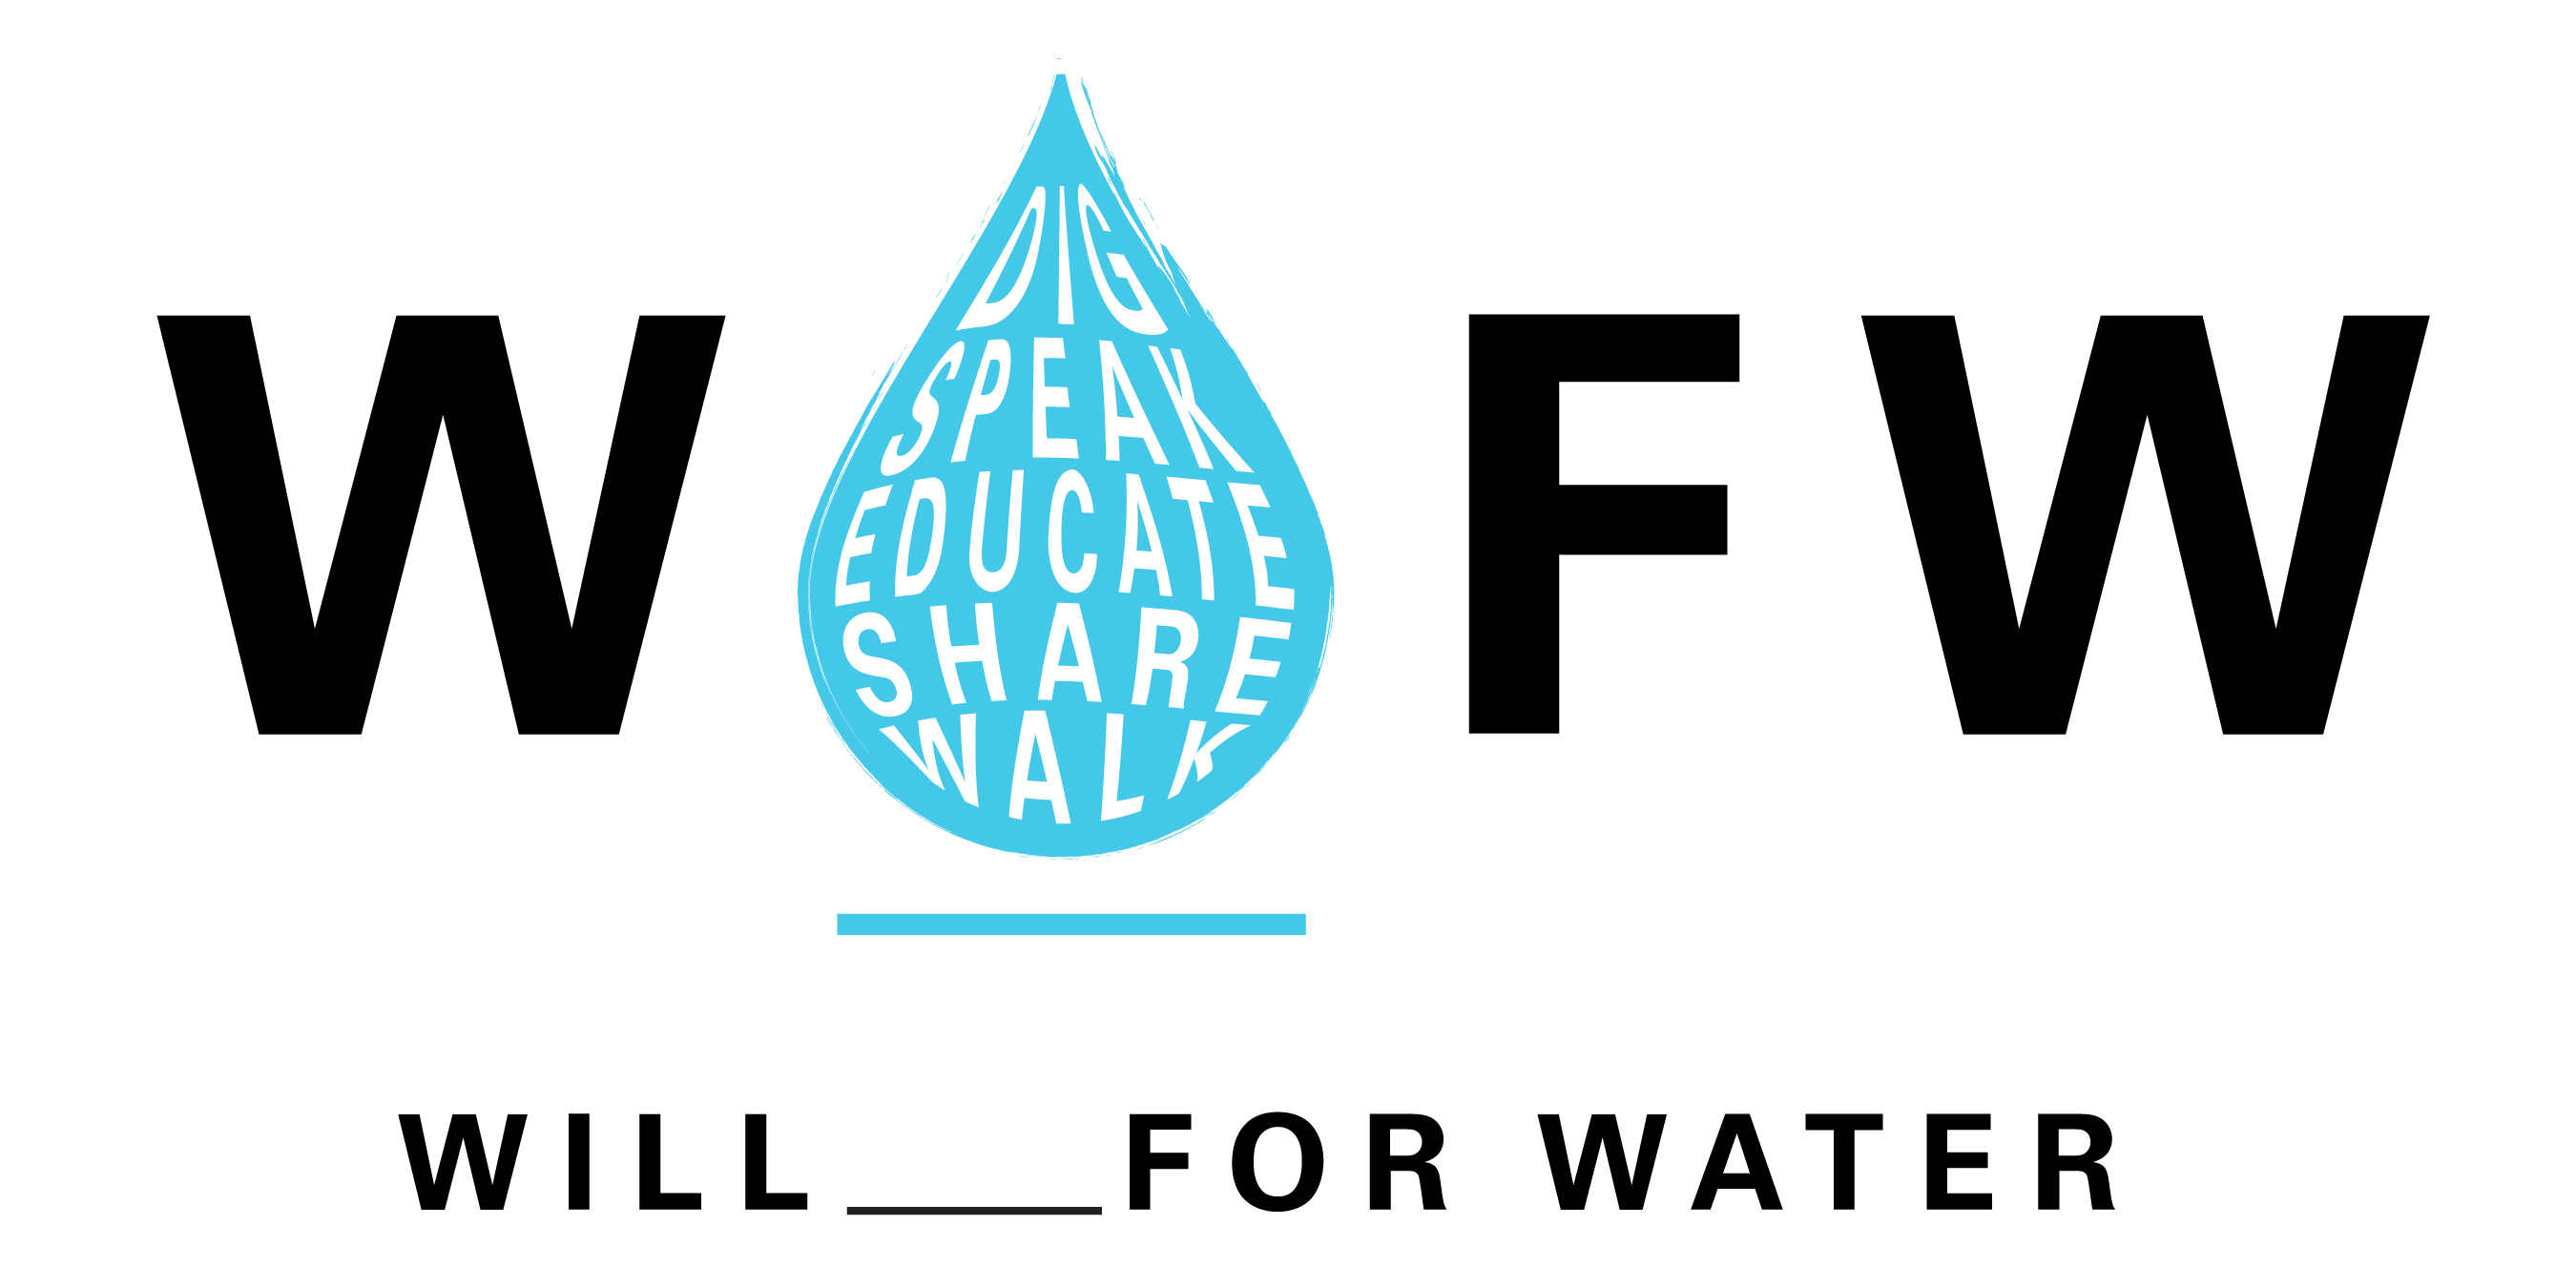 The Caterpillar Foundation, together with its global partners, launches the Value of Water campaign to raise awareness of the value of water and the impact of the global water crisis on community health, education and economics.